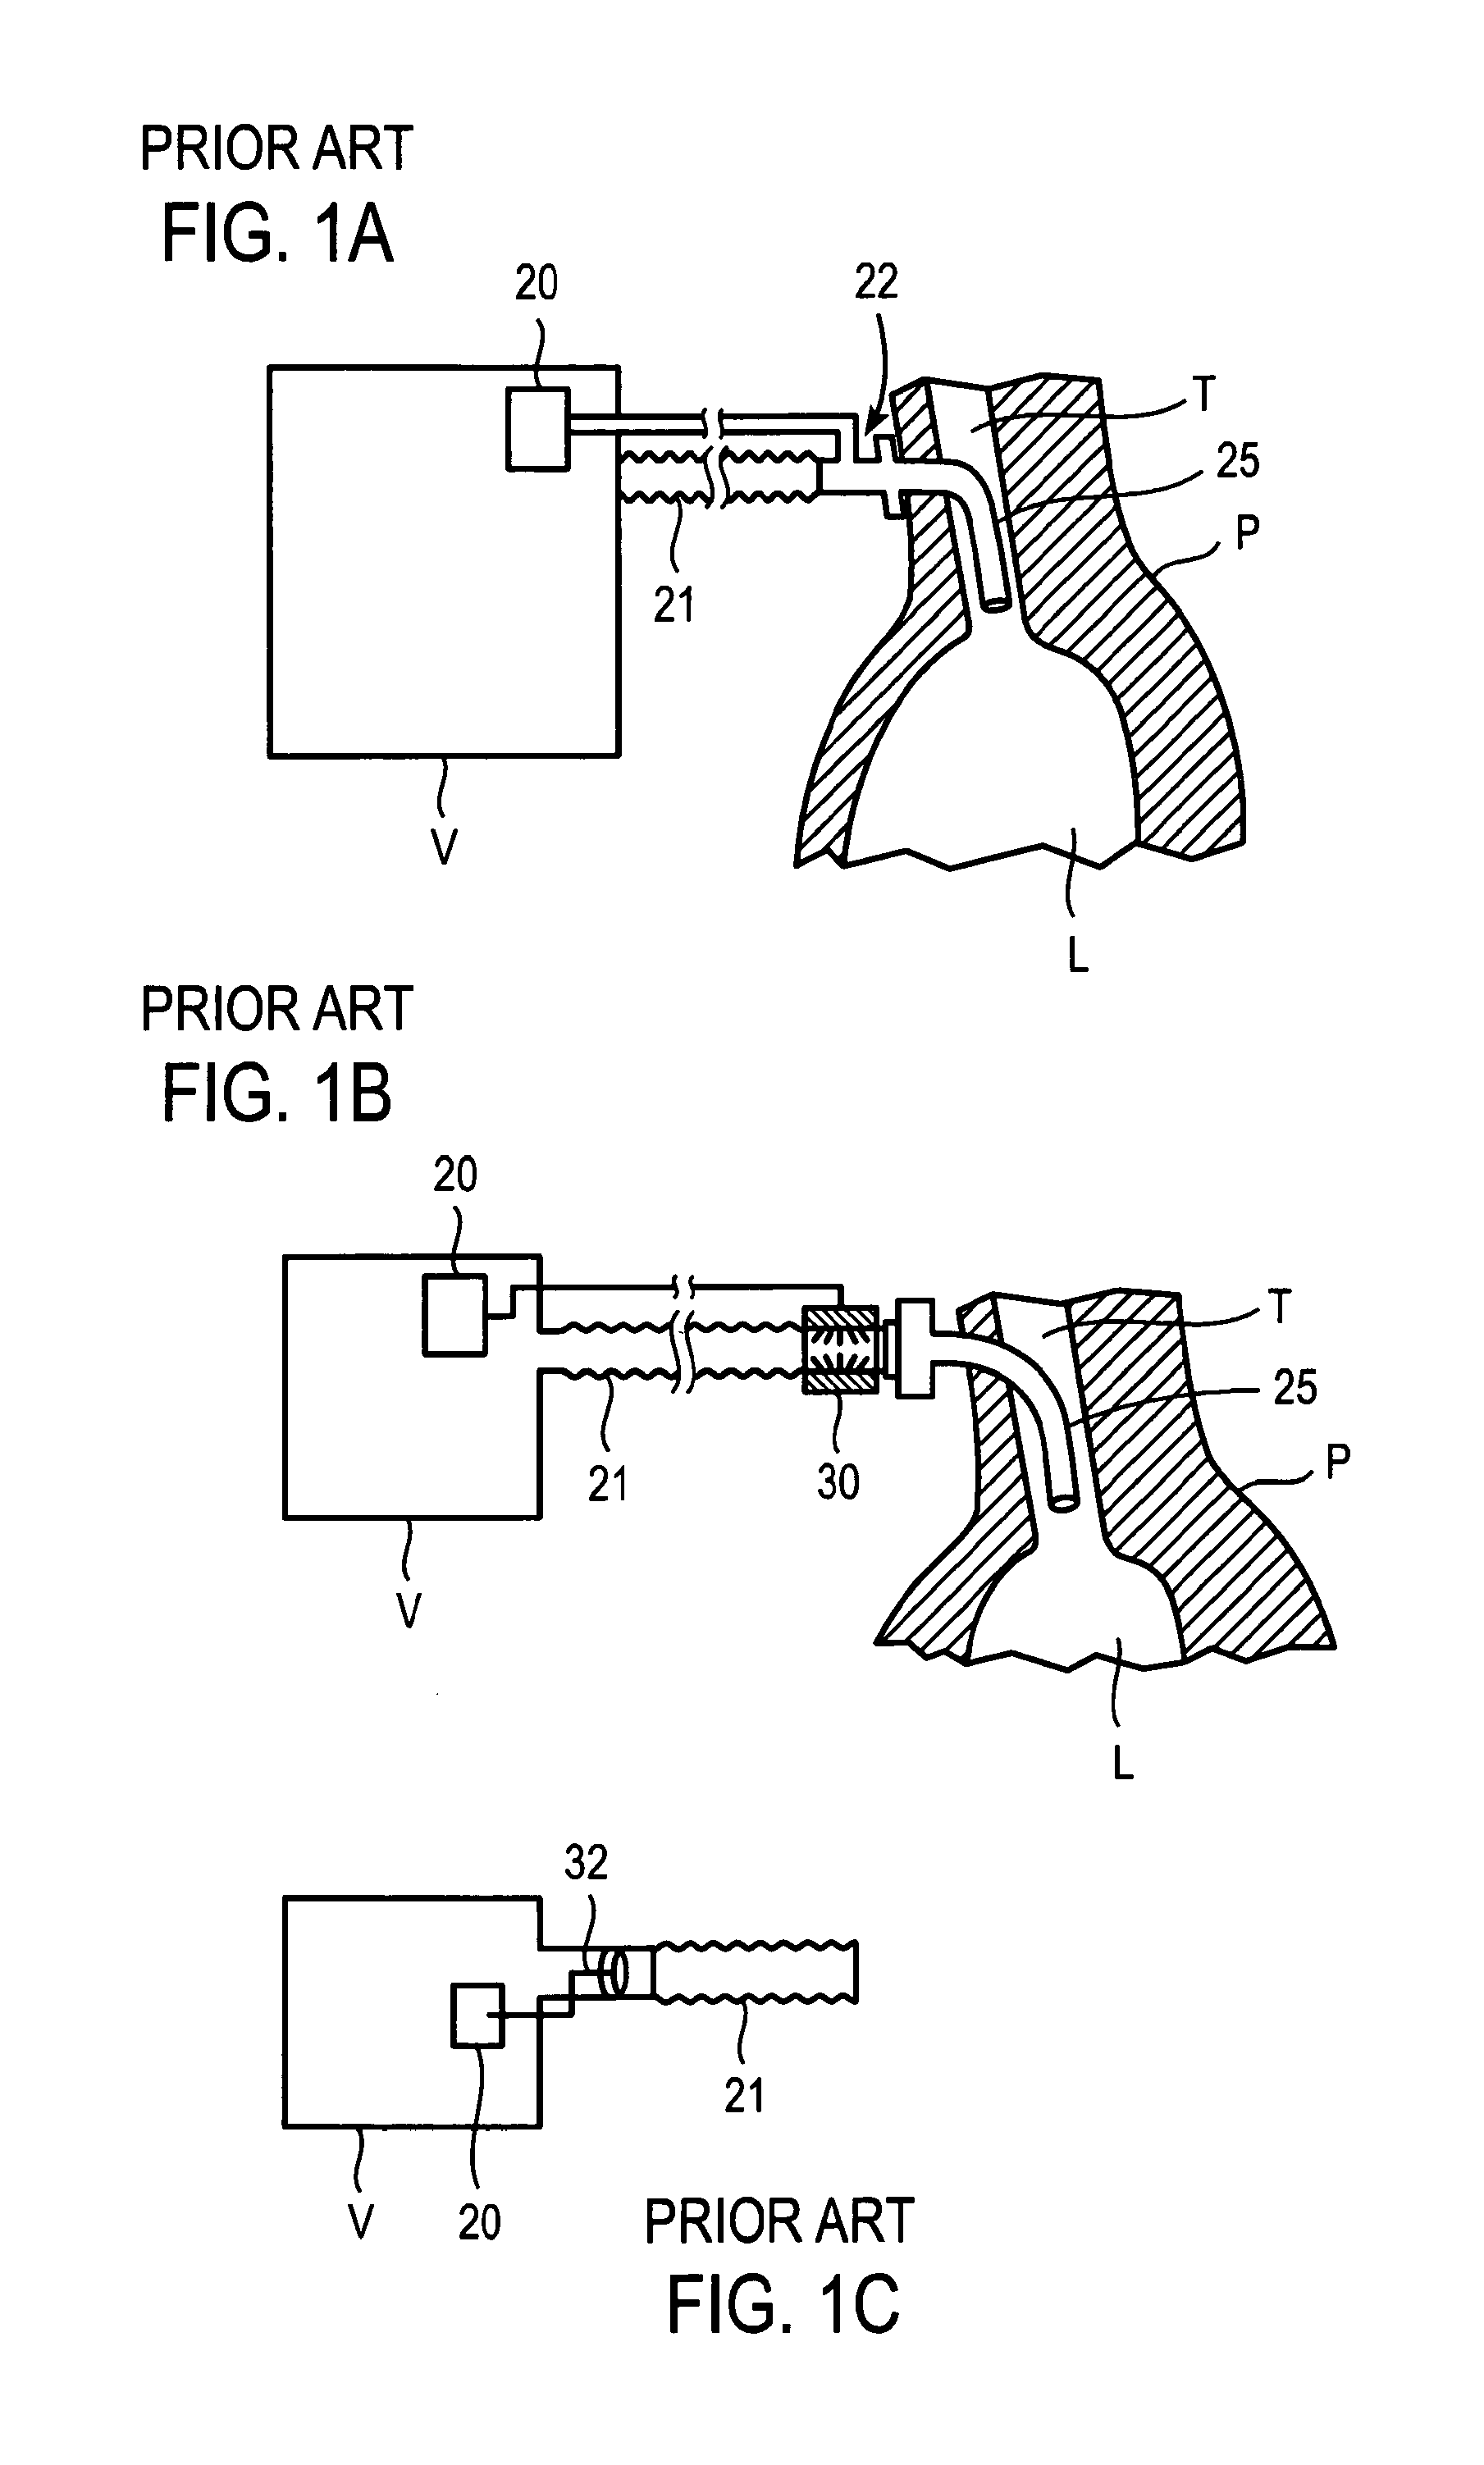 Methods and devices for sensing respiration and providing ventilation therapy